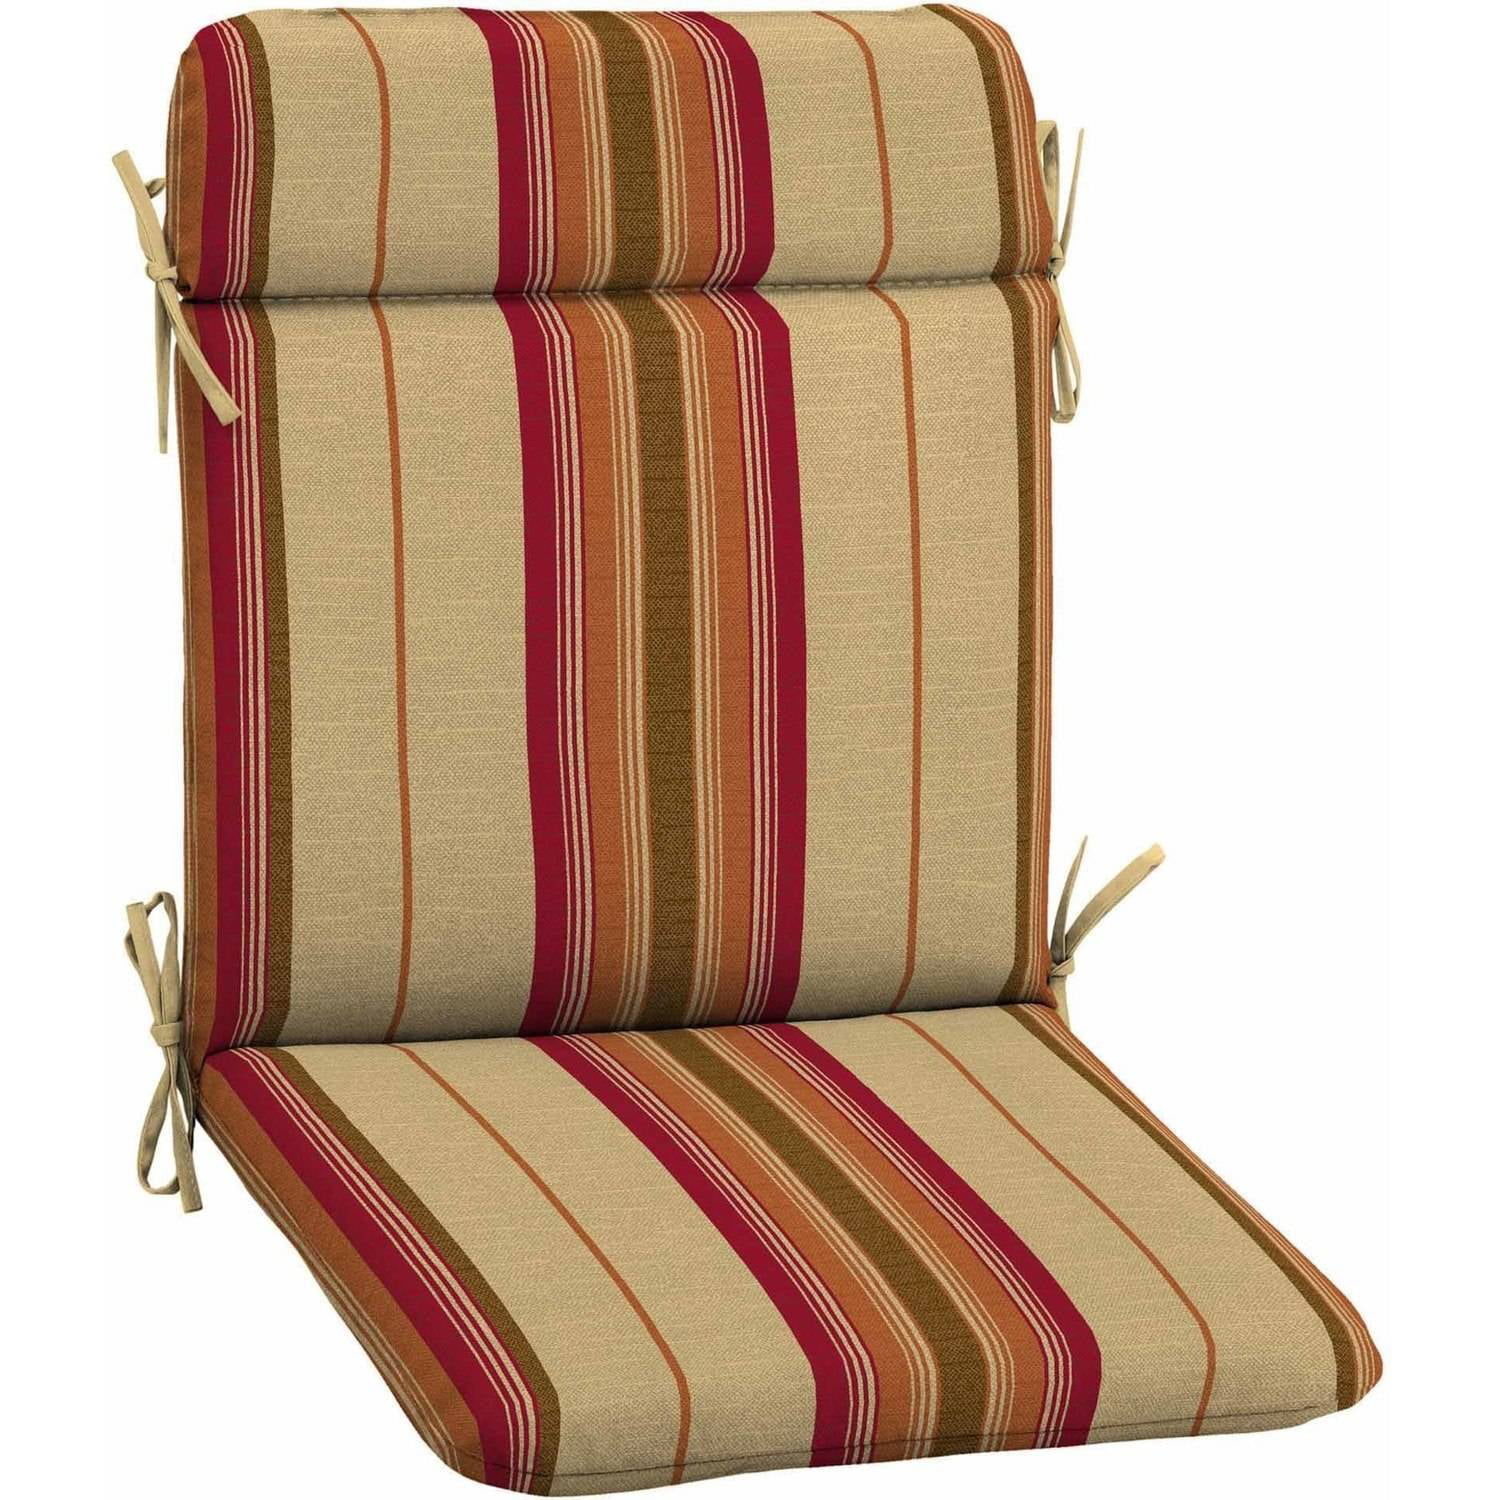 Better Homes and Gardens Outdoor Patio Mid Back Chair Cushion, Multiple